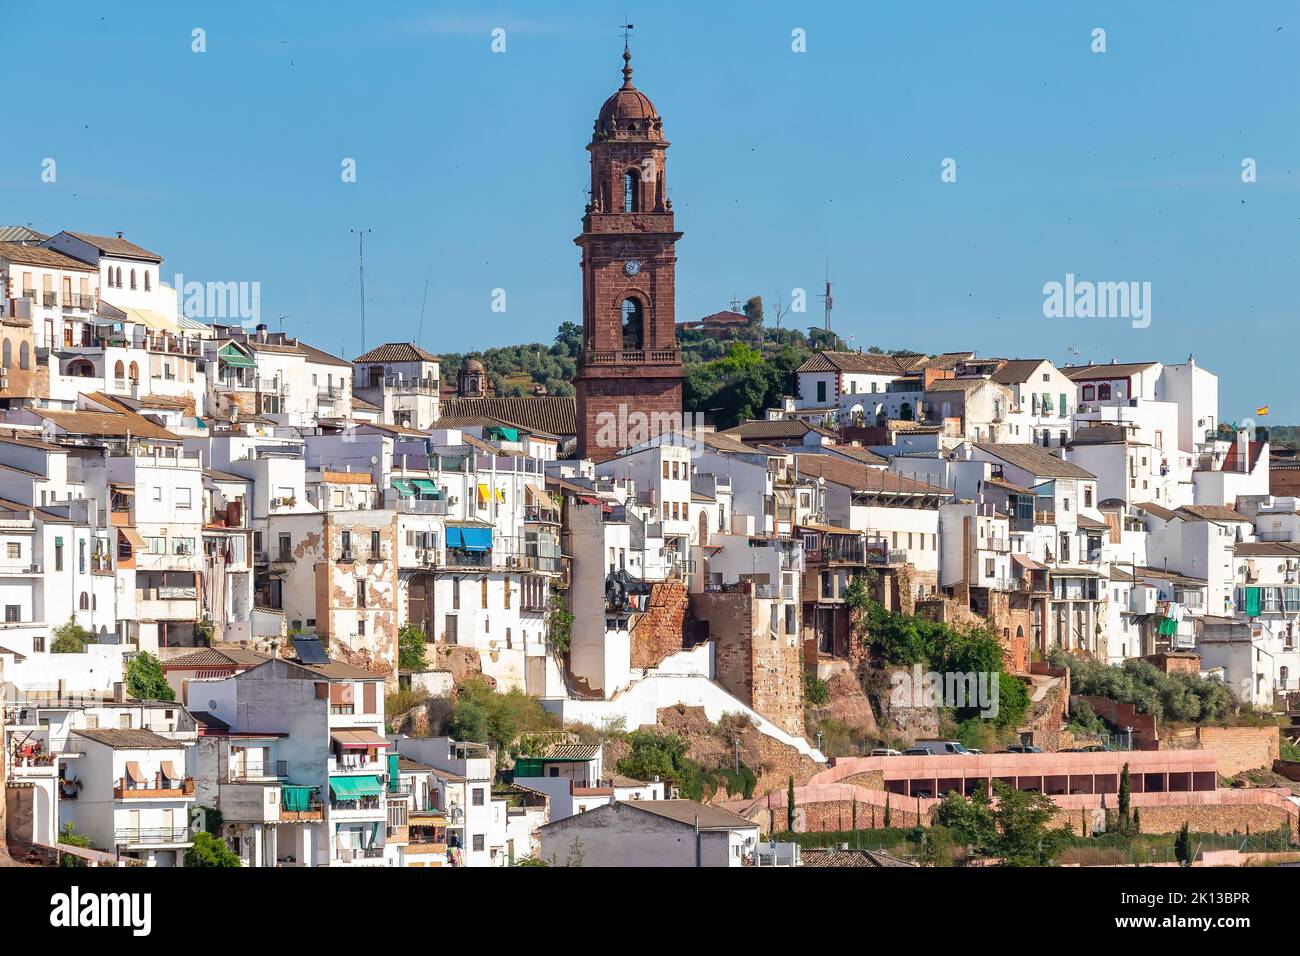 View of Montoro village, a city and municipality in the Cordoba Province of southern Spain, in the north-central part of the autonomous community of A Stock Photo